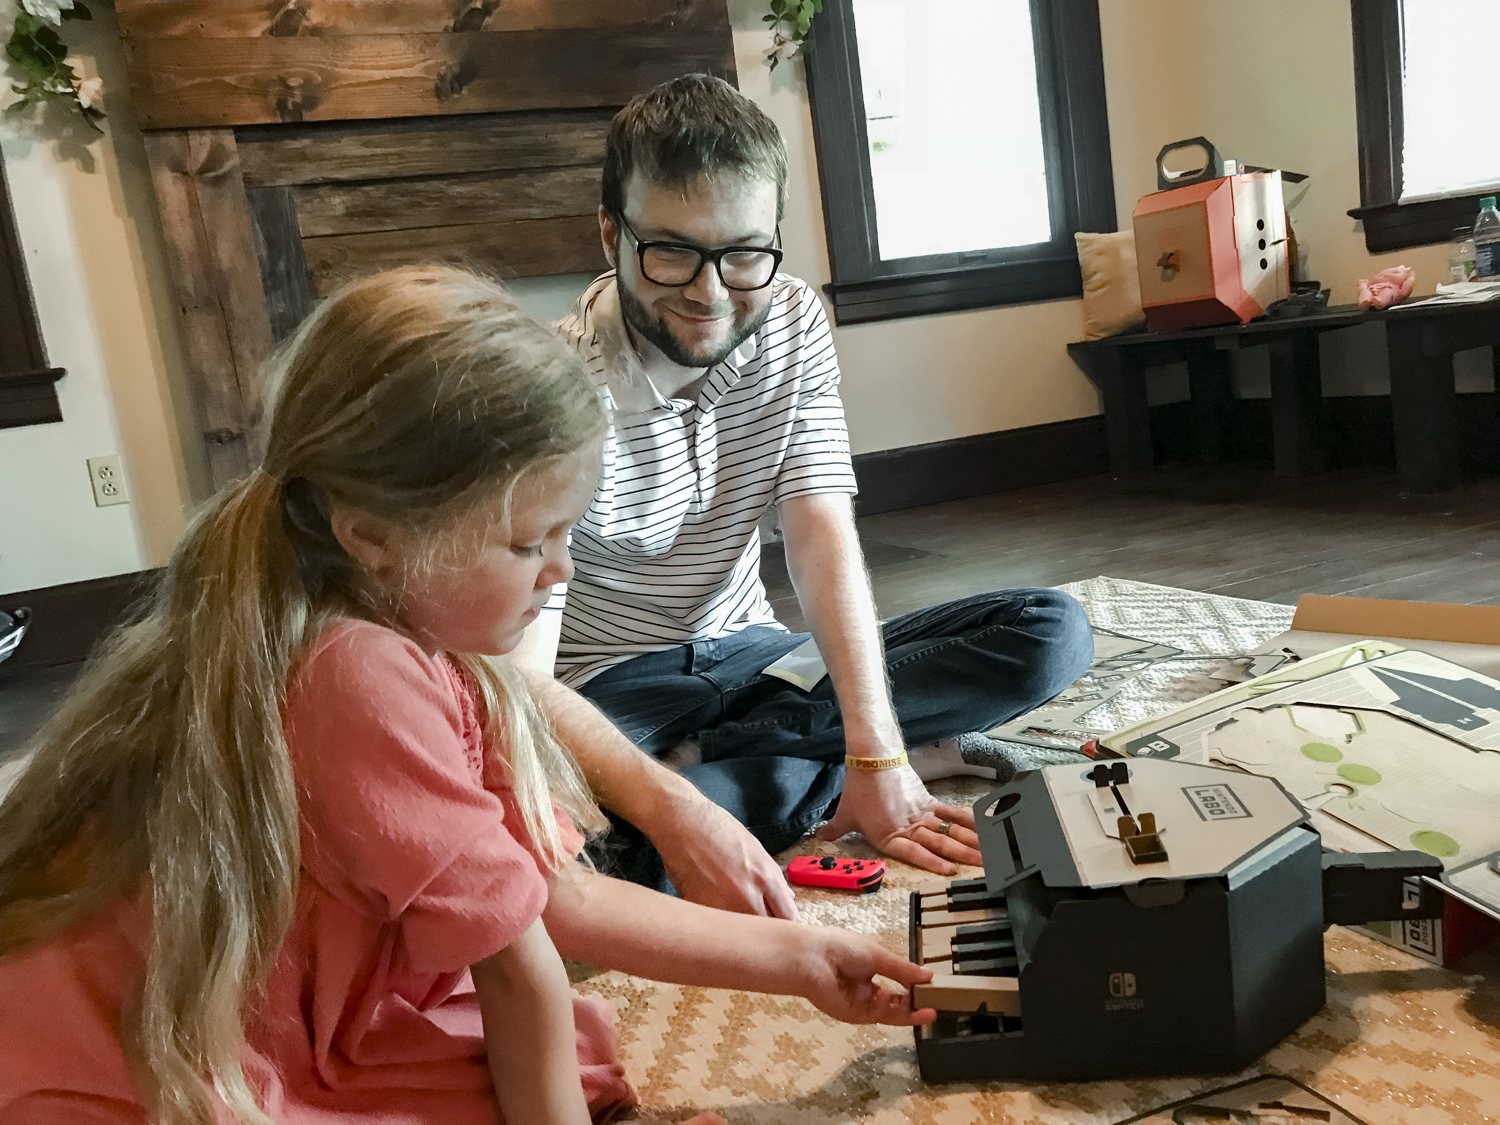 Nintendo Labo Vehicle Kit Hands-On: My Kid Self Would Love This